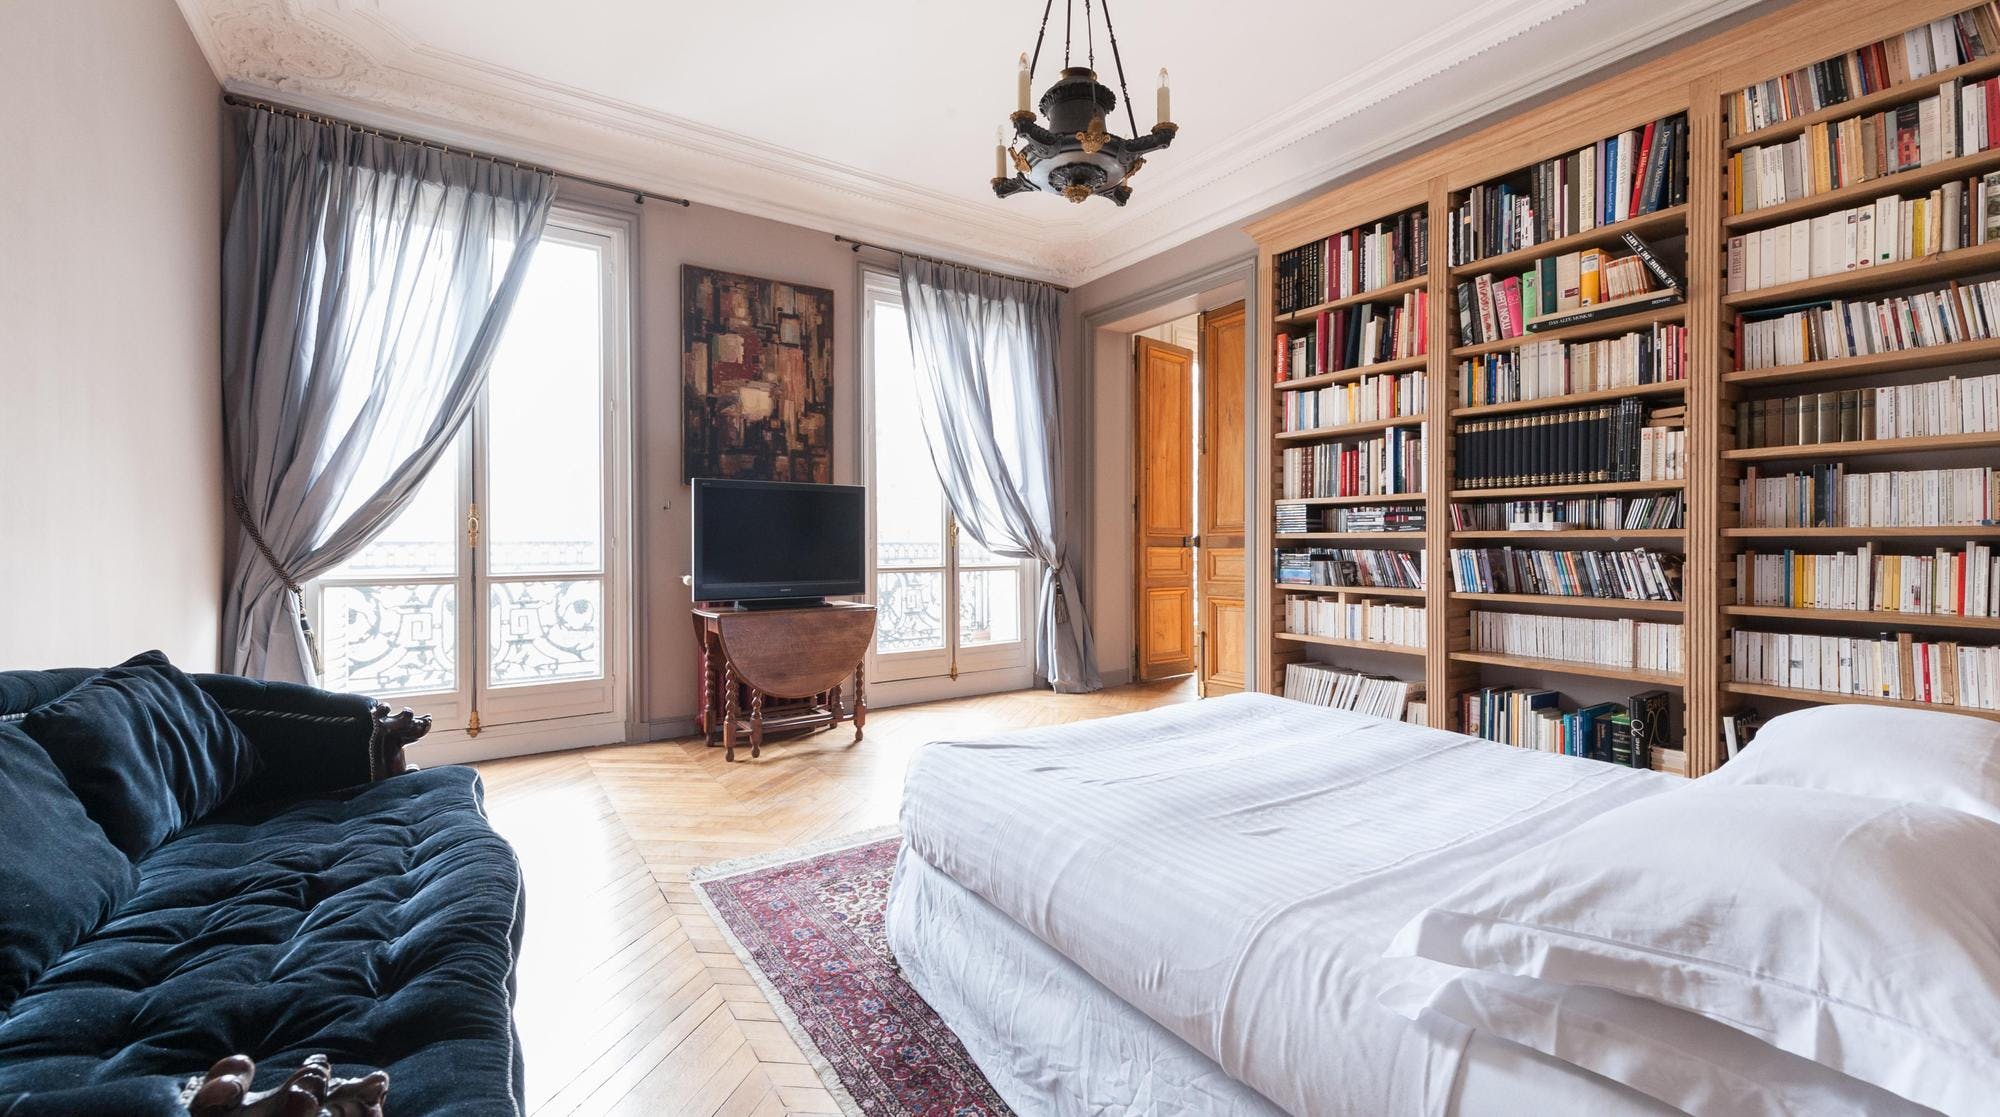 7 of the Best Luxury Apartments in Paris | The Plum Guide